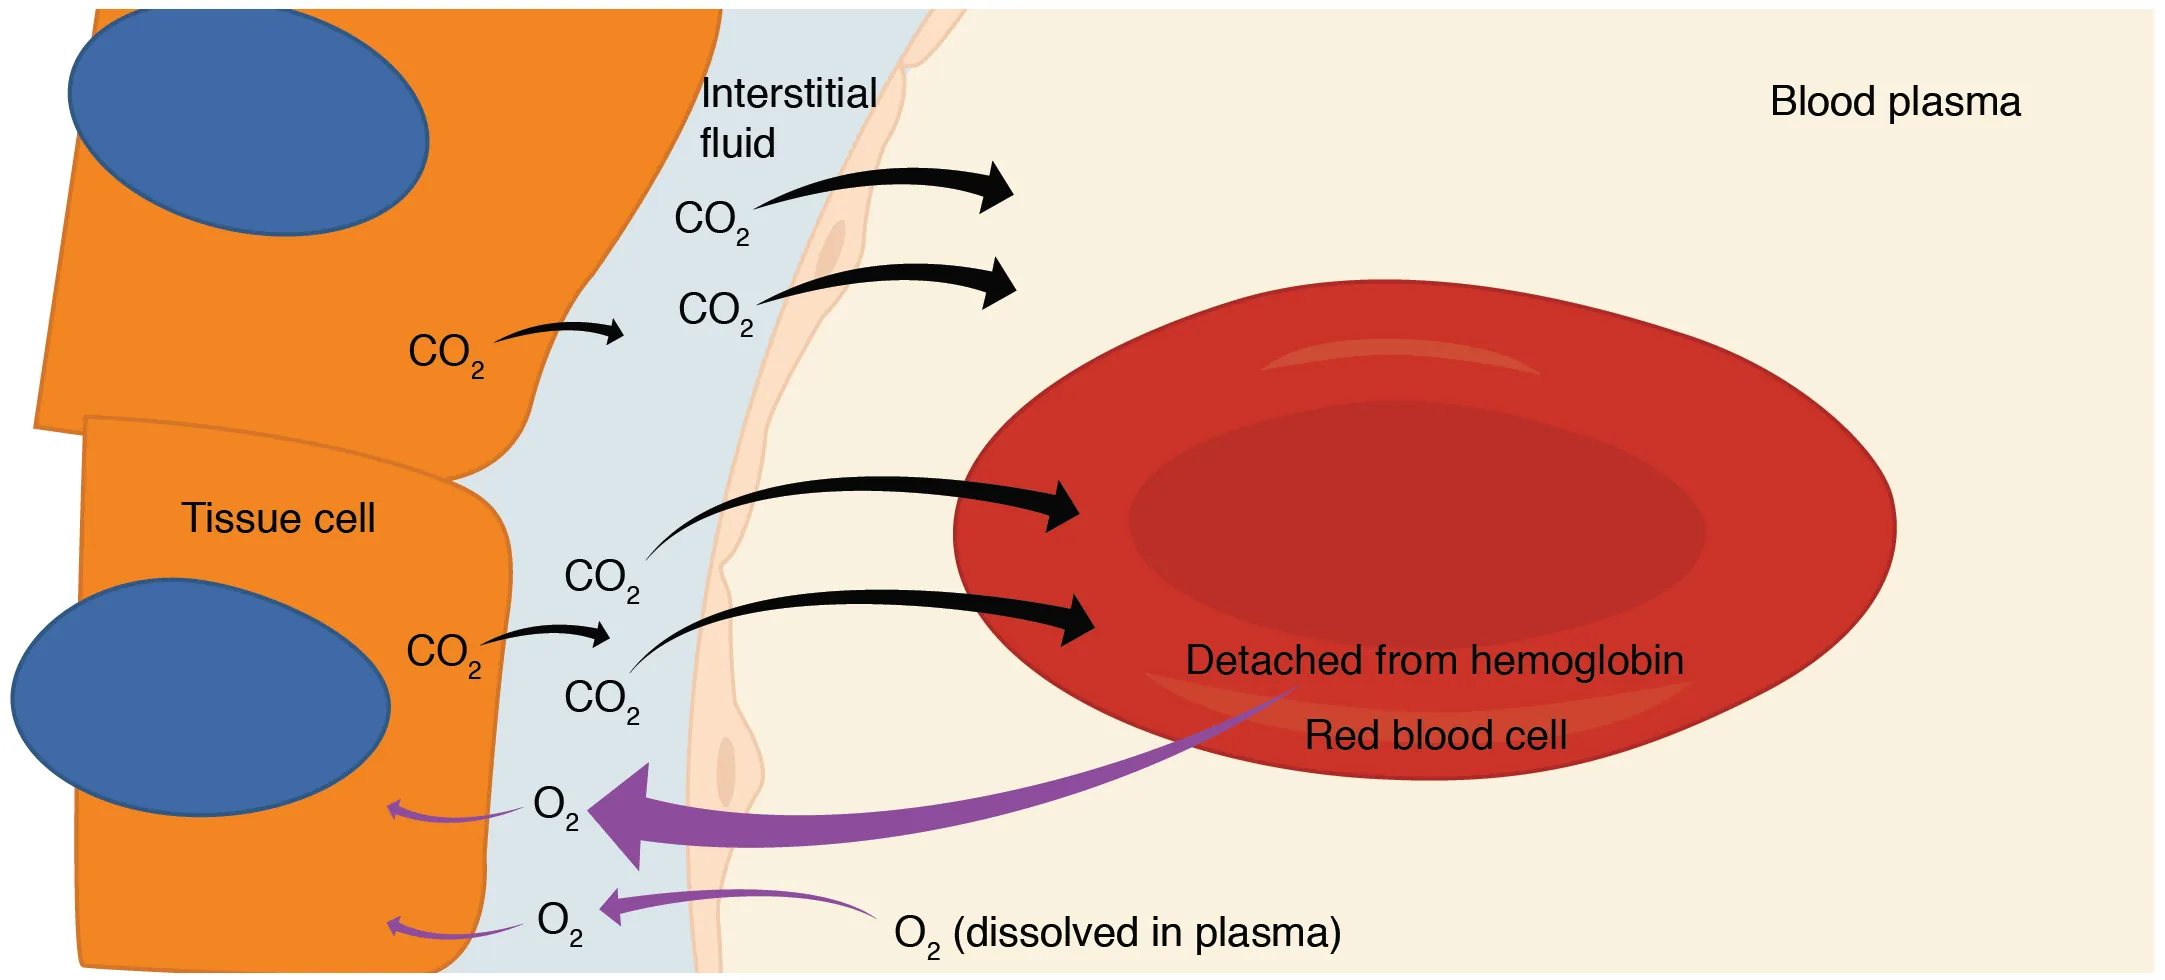 This diagram details the pathway of internal respiration. The exchange of oxygen and carbon dioxide between a red blood cell and a tissue cell is shown.